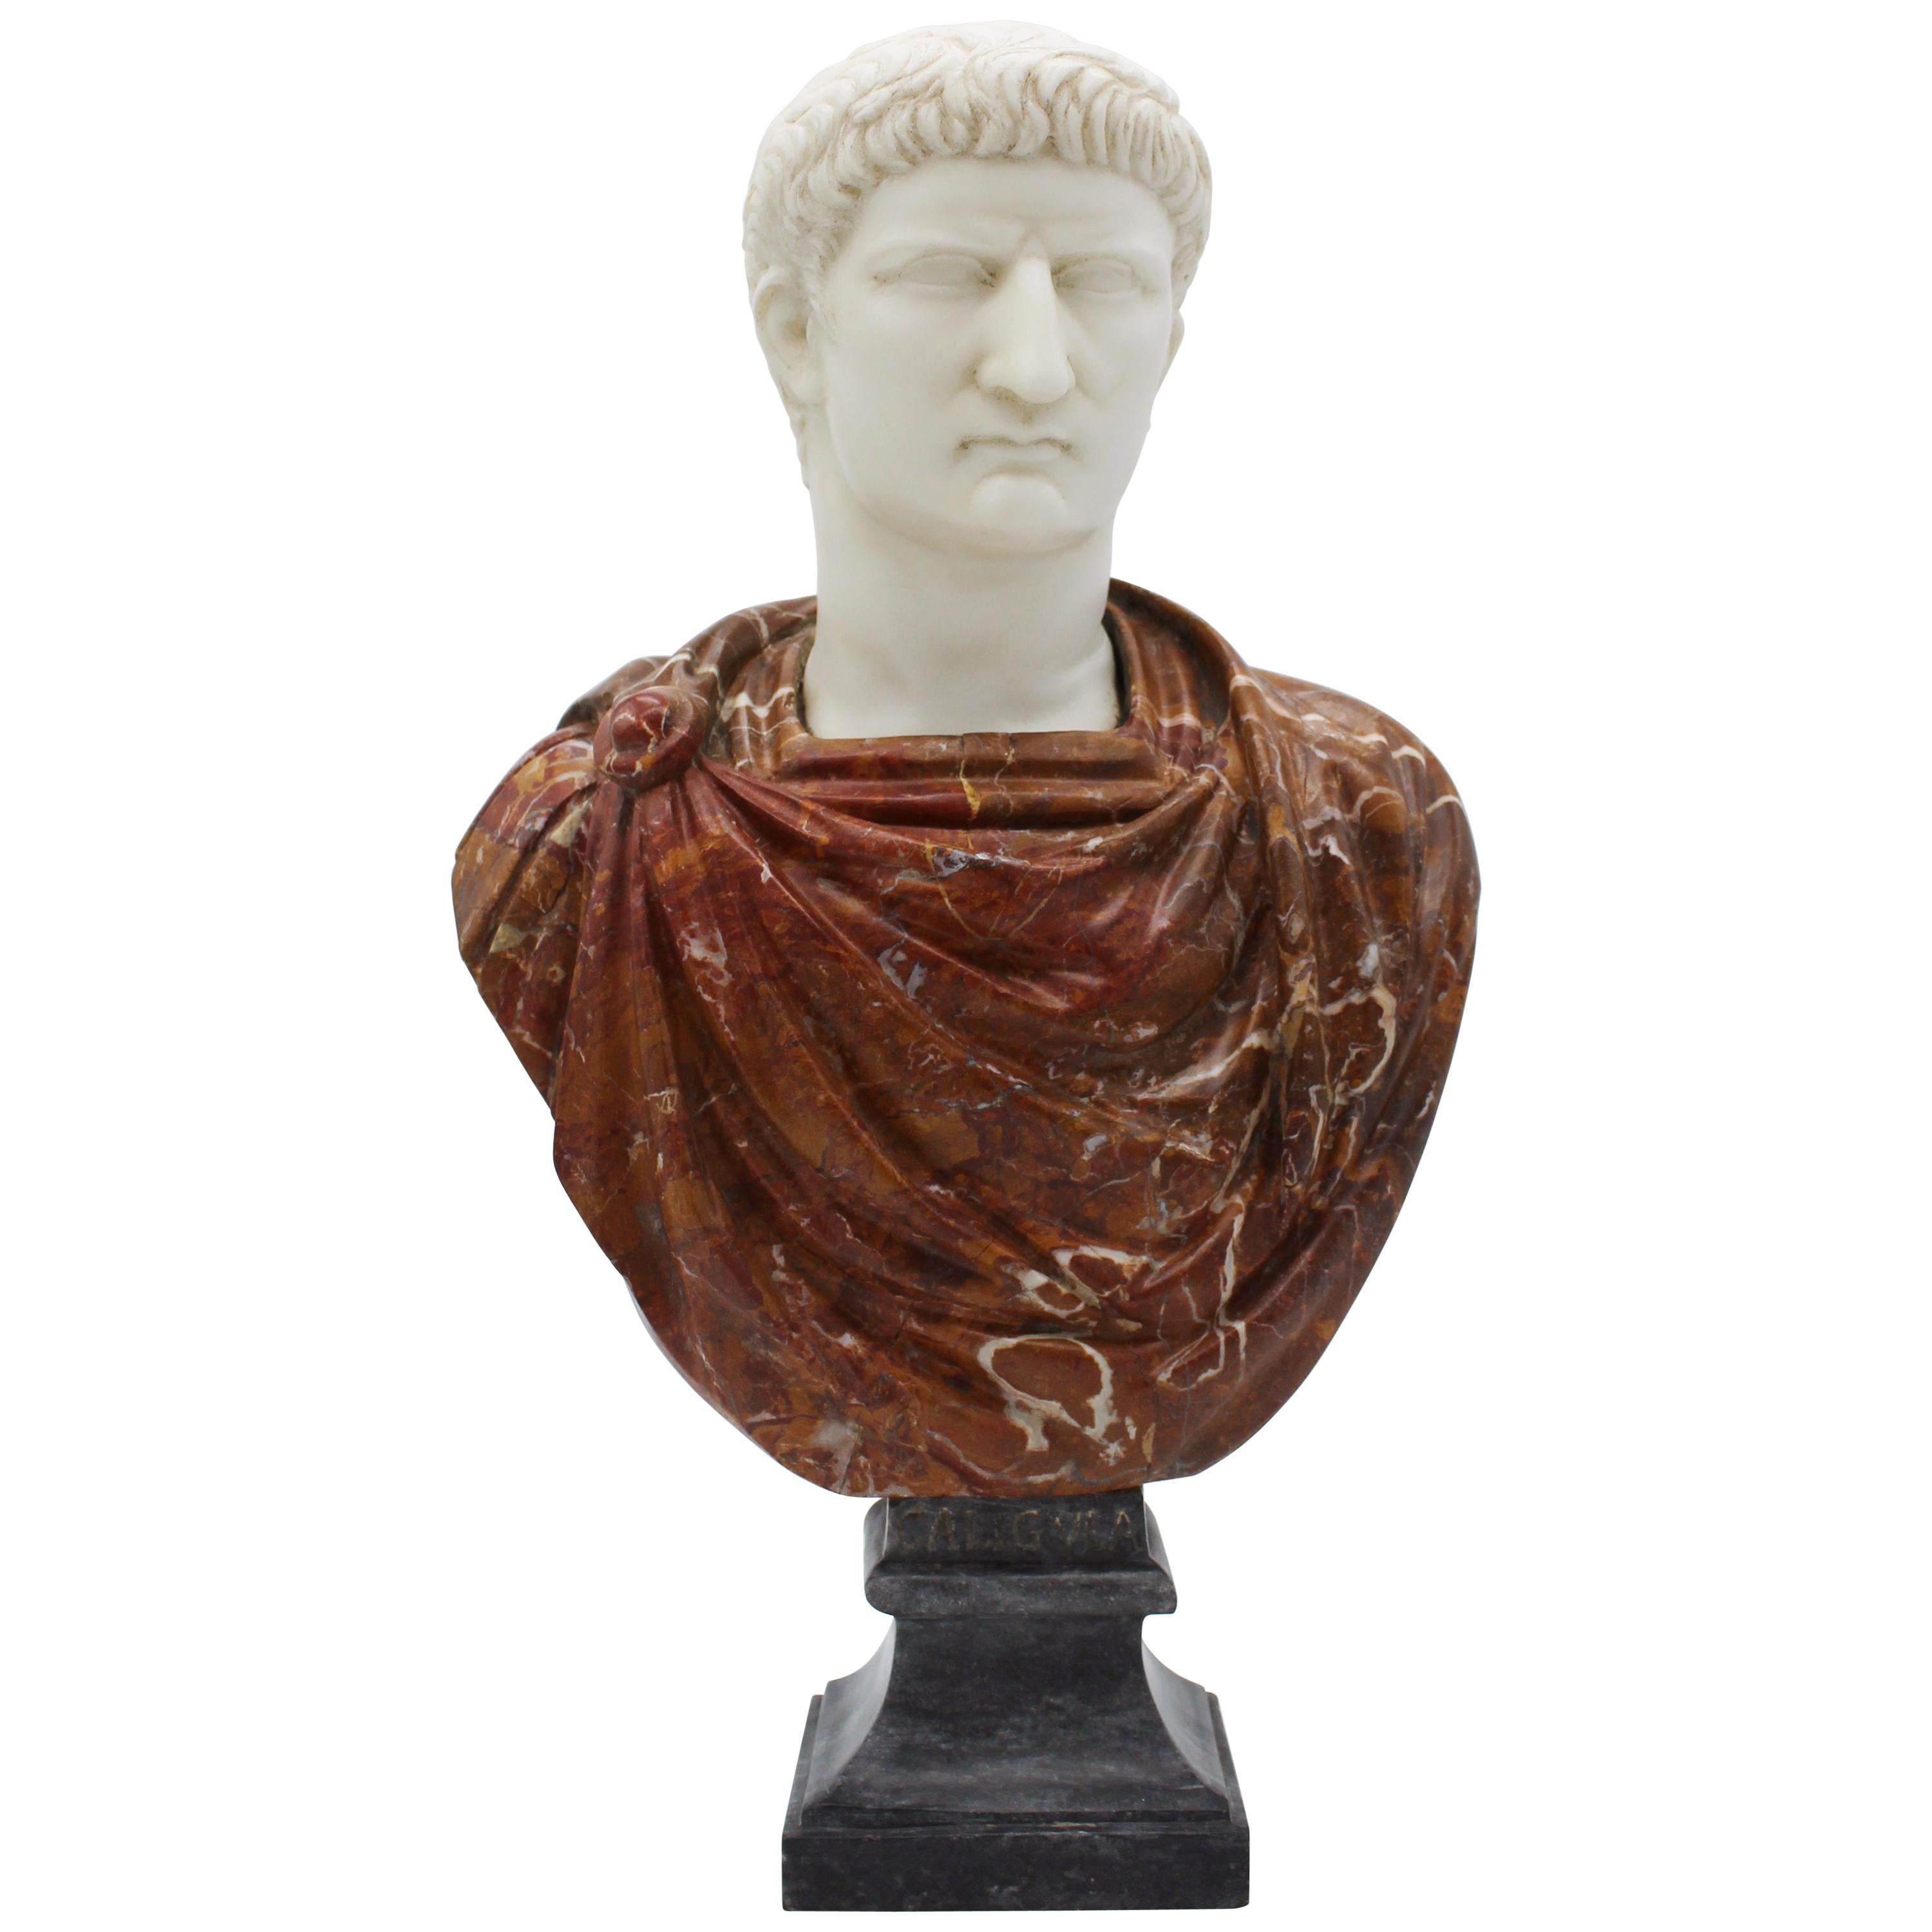 20th Century Italian Marble Sculpture Bust of Emperor Caligula By G.Pace